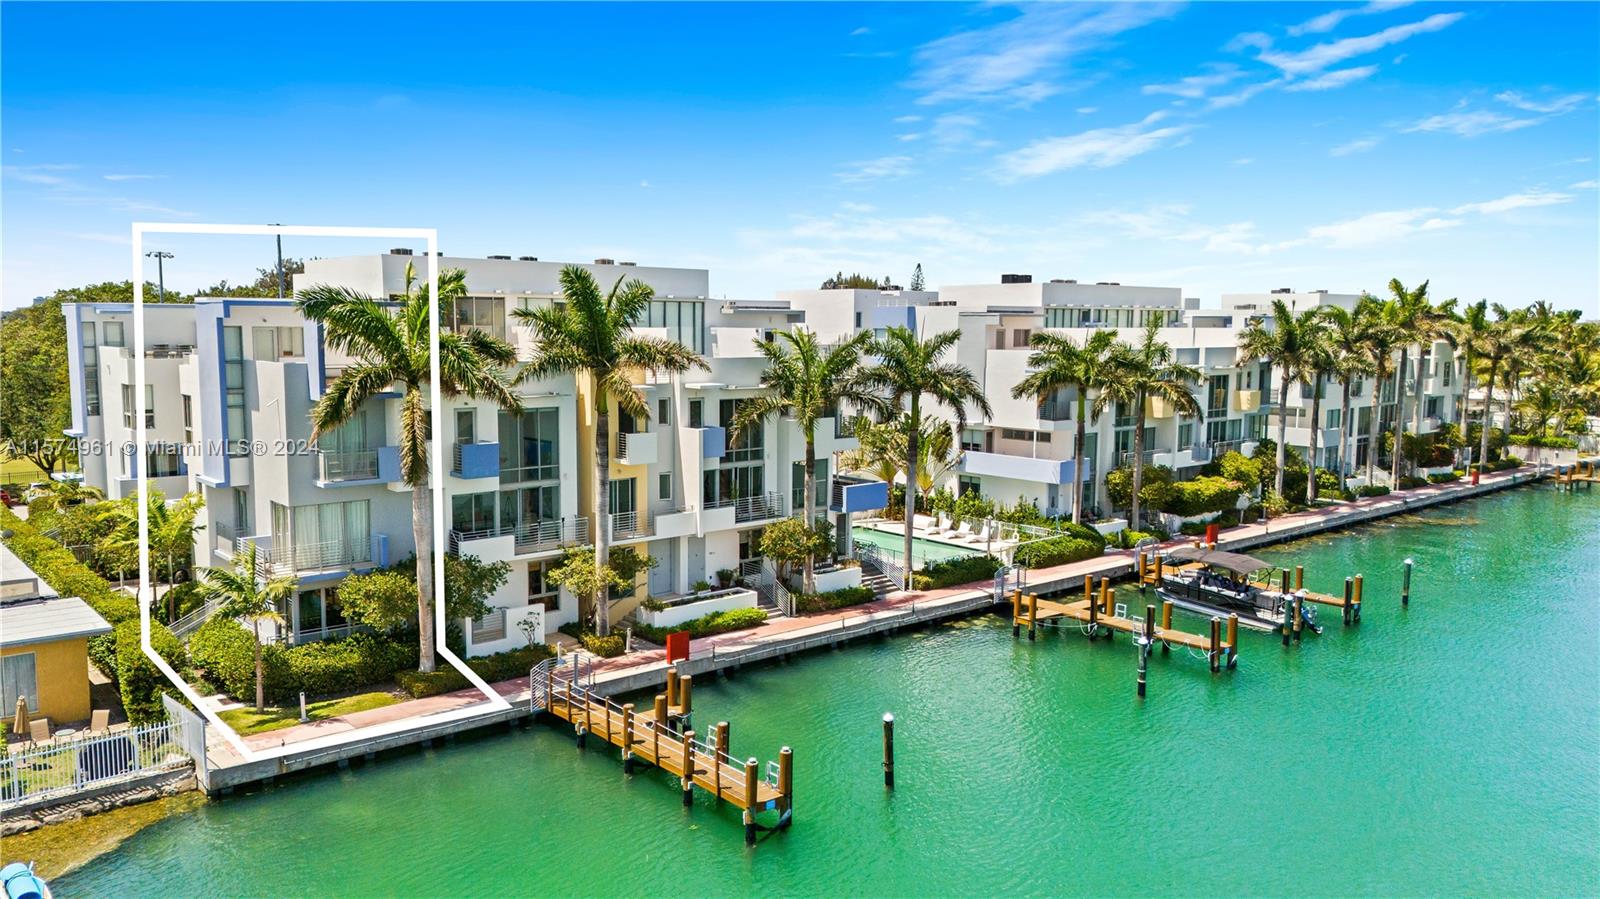 Indulge in waterfront luxury with this elegant 3Bed/3.5Bath townhouse corner unit + rooftop terrace. Located directly adjacent to the prestigious Normandy Shores Golf Course and Fairway Park, this corner unit offers light-filled interiors, an open kitchen concept and captivating water views from all three levels. Multiple balconies and a stunning rooftop terrace seamlessly blend indoor and outdoor living. Enhanced by a pool and a community boat dock, this residence is designed for those who appreciate the Bayfront lifestyle. This home is equipped with impact windows and a top-notch alarm system. The complex offers 24/7 gated security with camera surveillance for your peace of mind. Ocean access is only a few minutes down the road, making this home a perfect retreat for water enthusiasts.